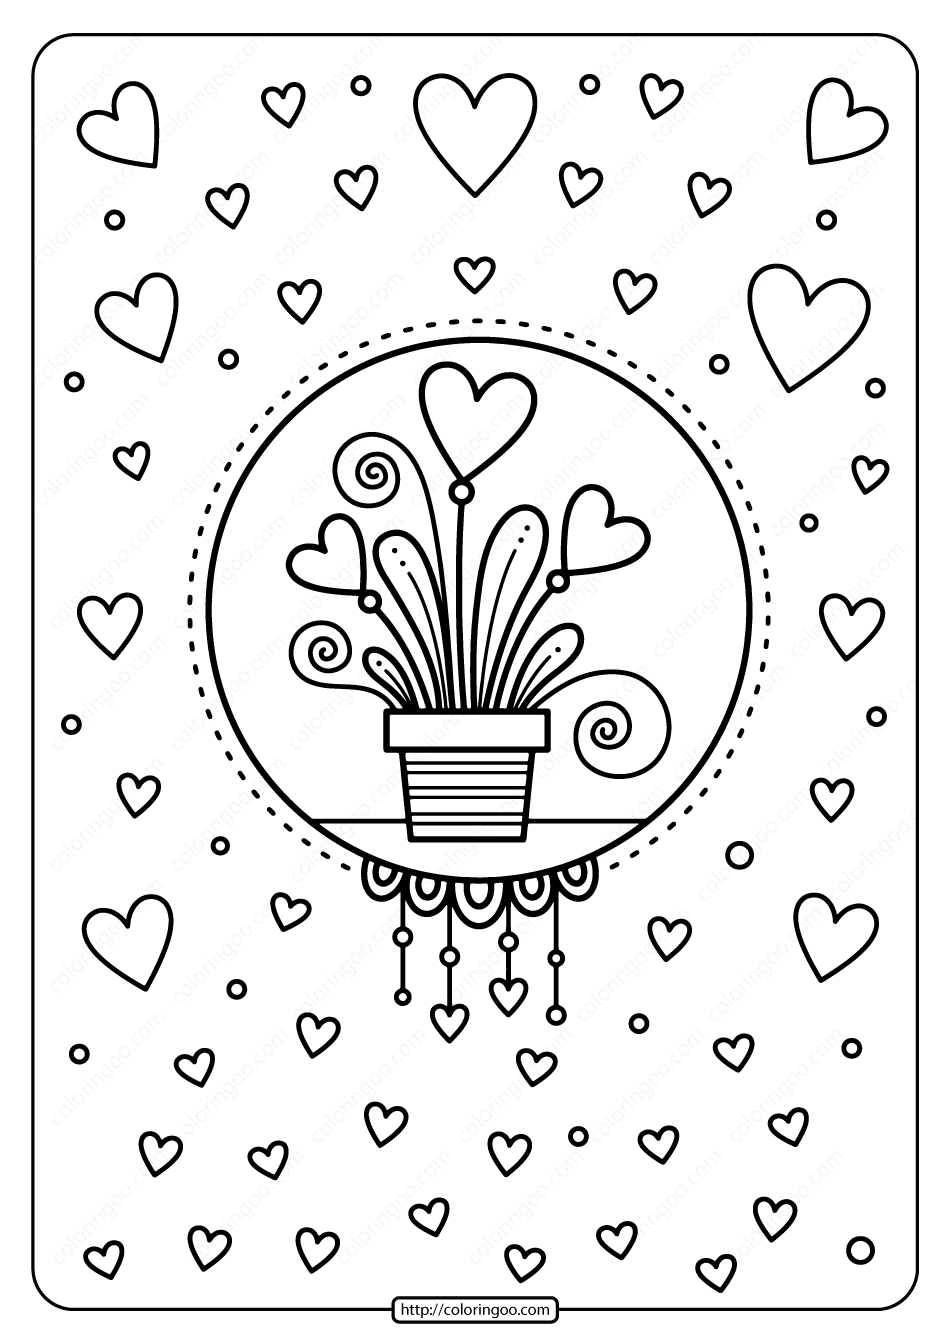 Printable Hearts in Flower Pot Pdf Coloring Page